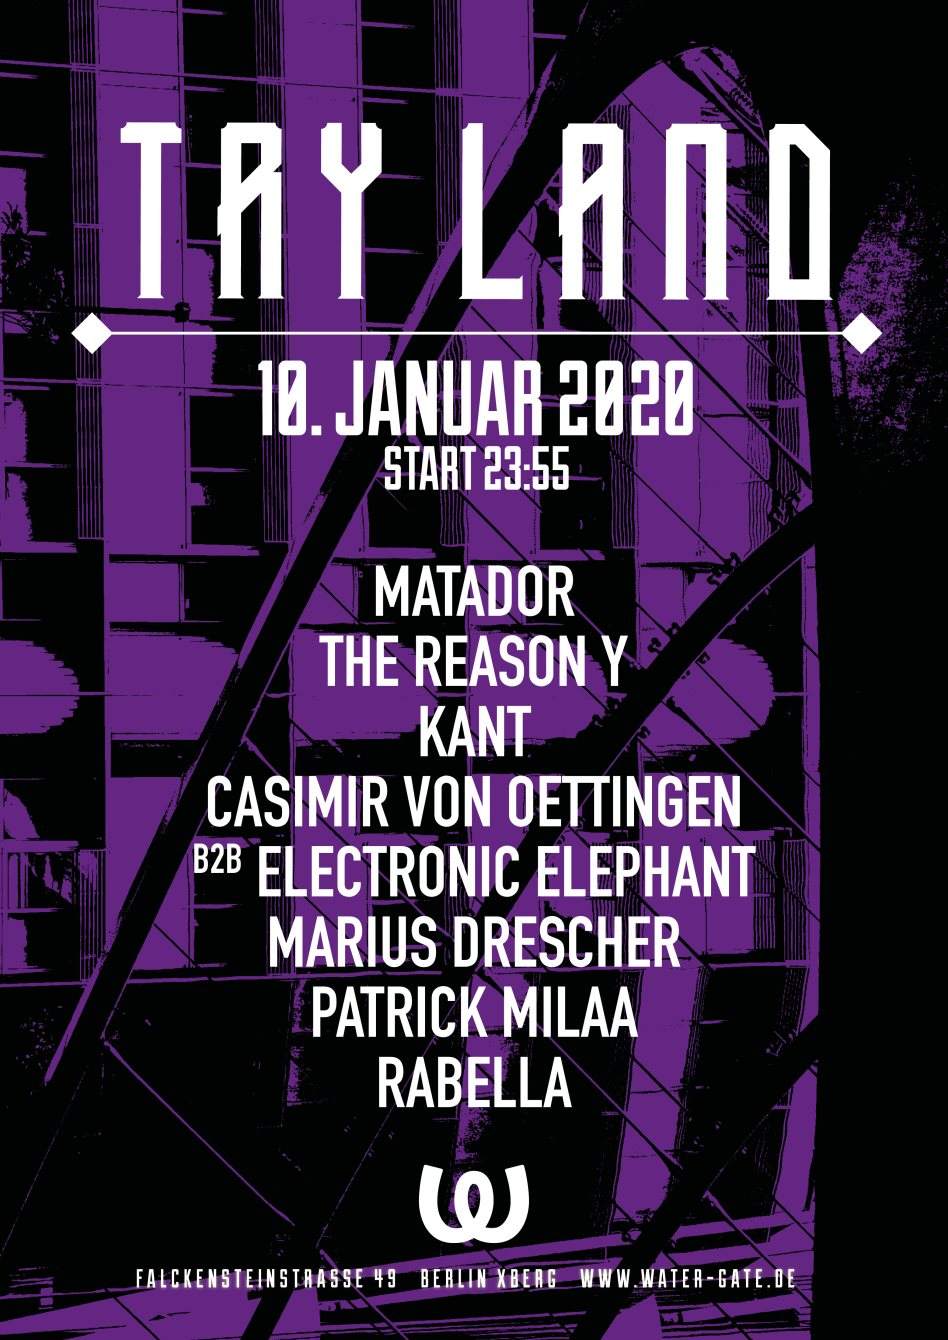 Try Land with Matador, The Reason Y, Kant, Casimir von Oettingen, Electronic Elephant and More - フライヤー表